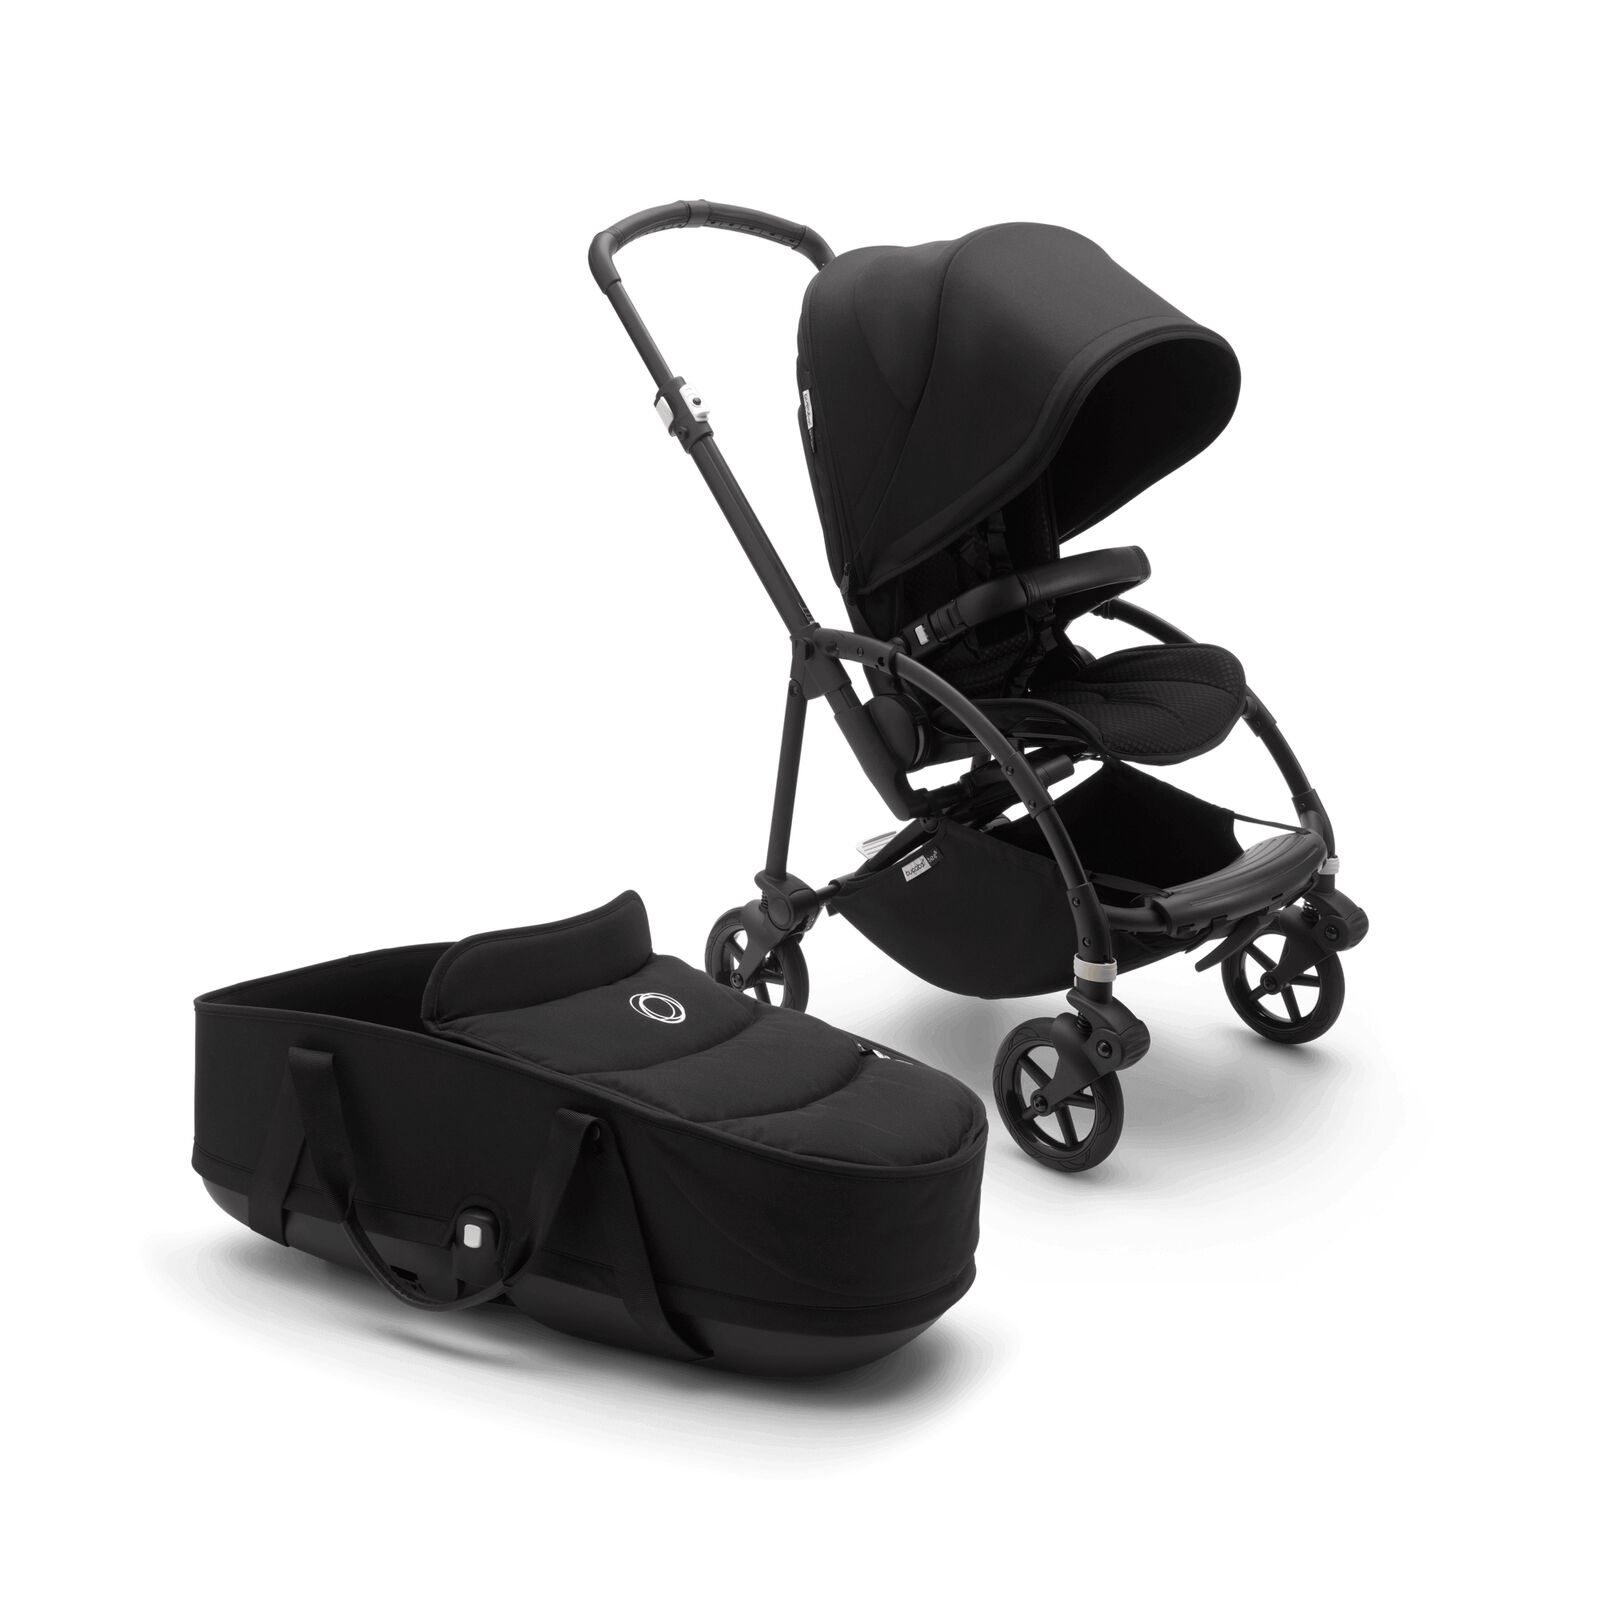 Bugaboo Bee 6 bassinet and seat stroller - View 2